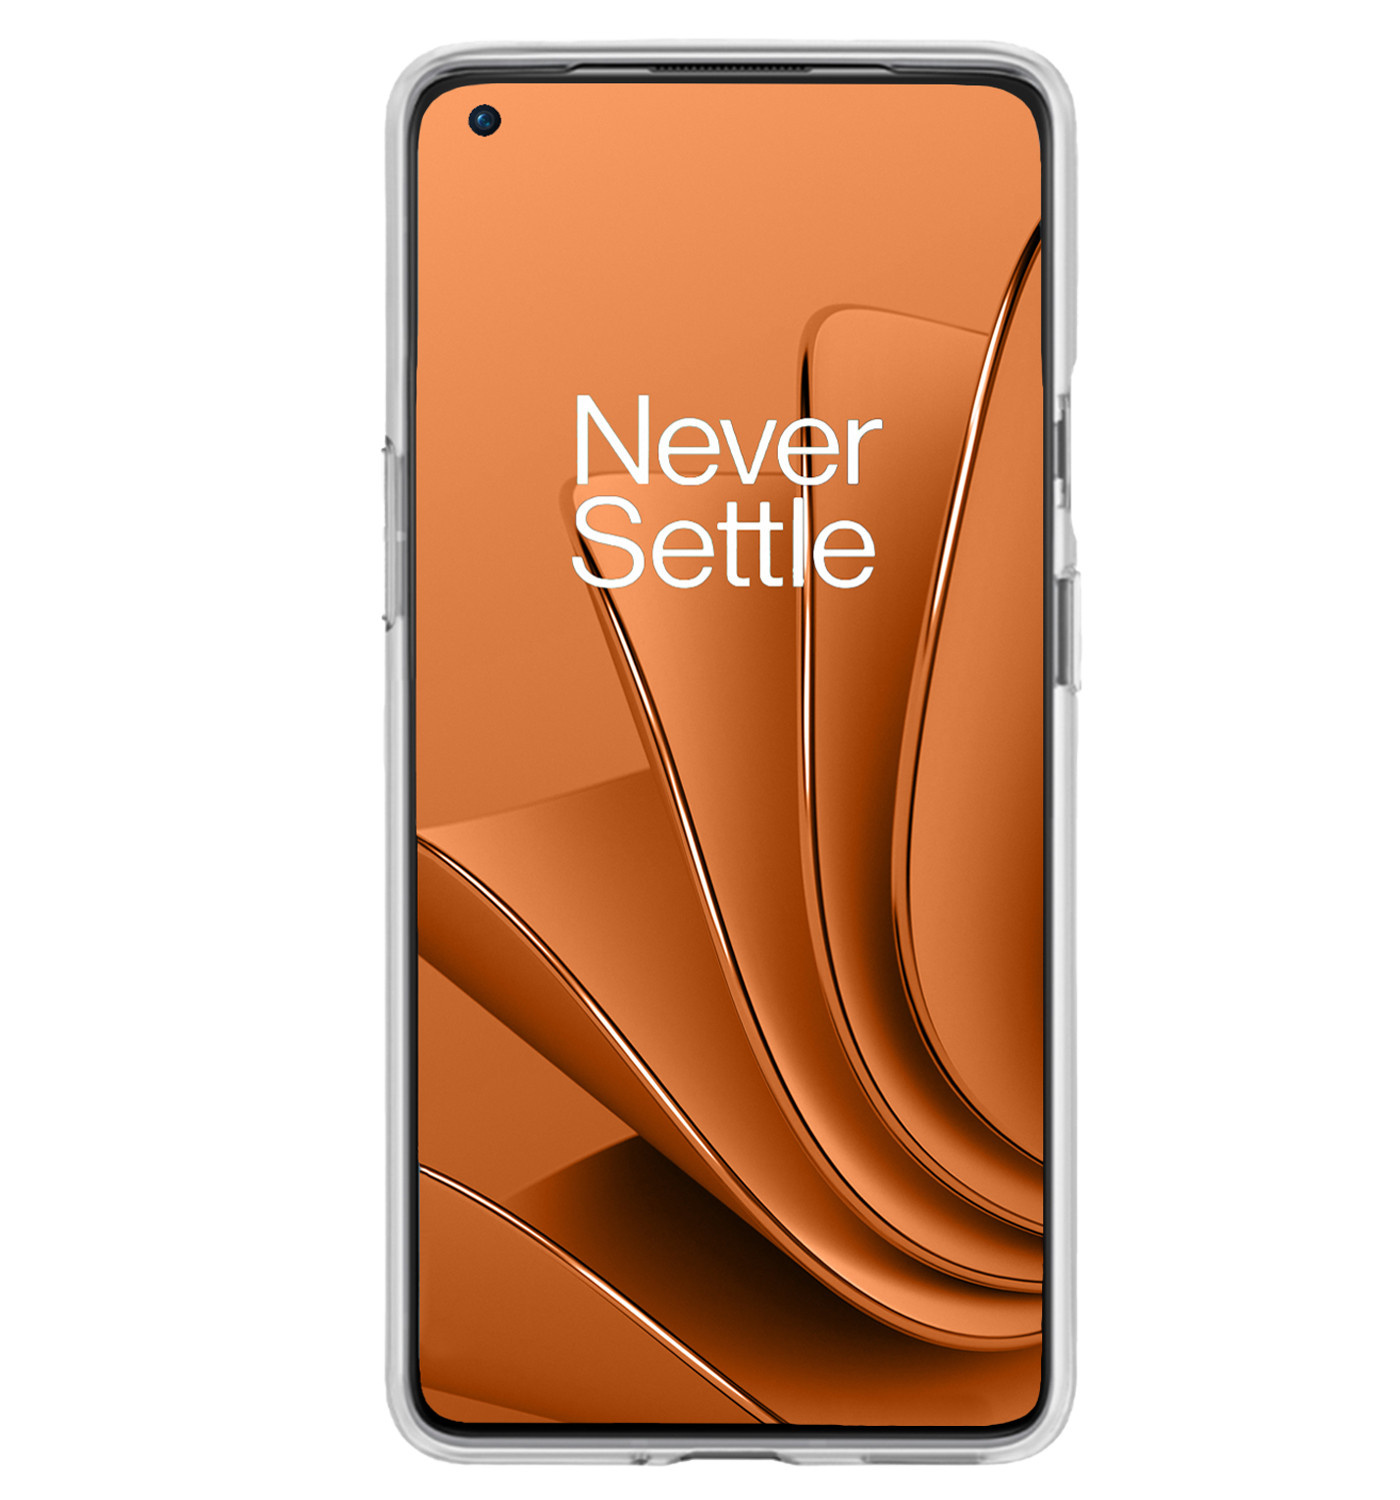 Nomfy OnePlus 10 Pro Hoesje Siliconen - OnePlus 10 Pro Hoesje Transparant Case - OnePlus 10 Pro Cover Siliconen Back Cover - Transparant